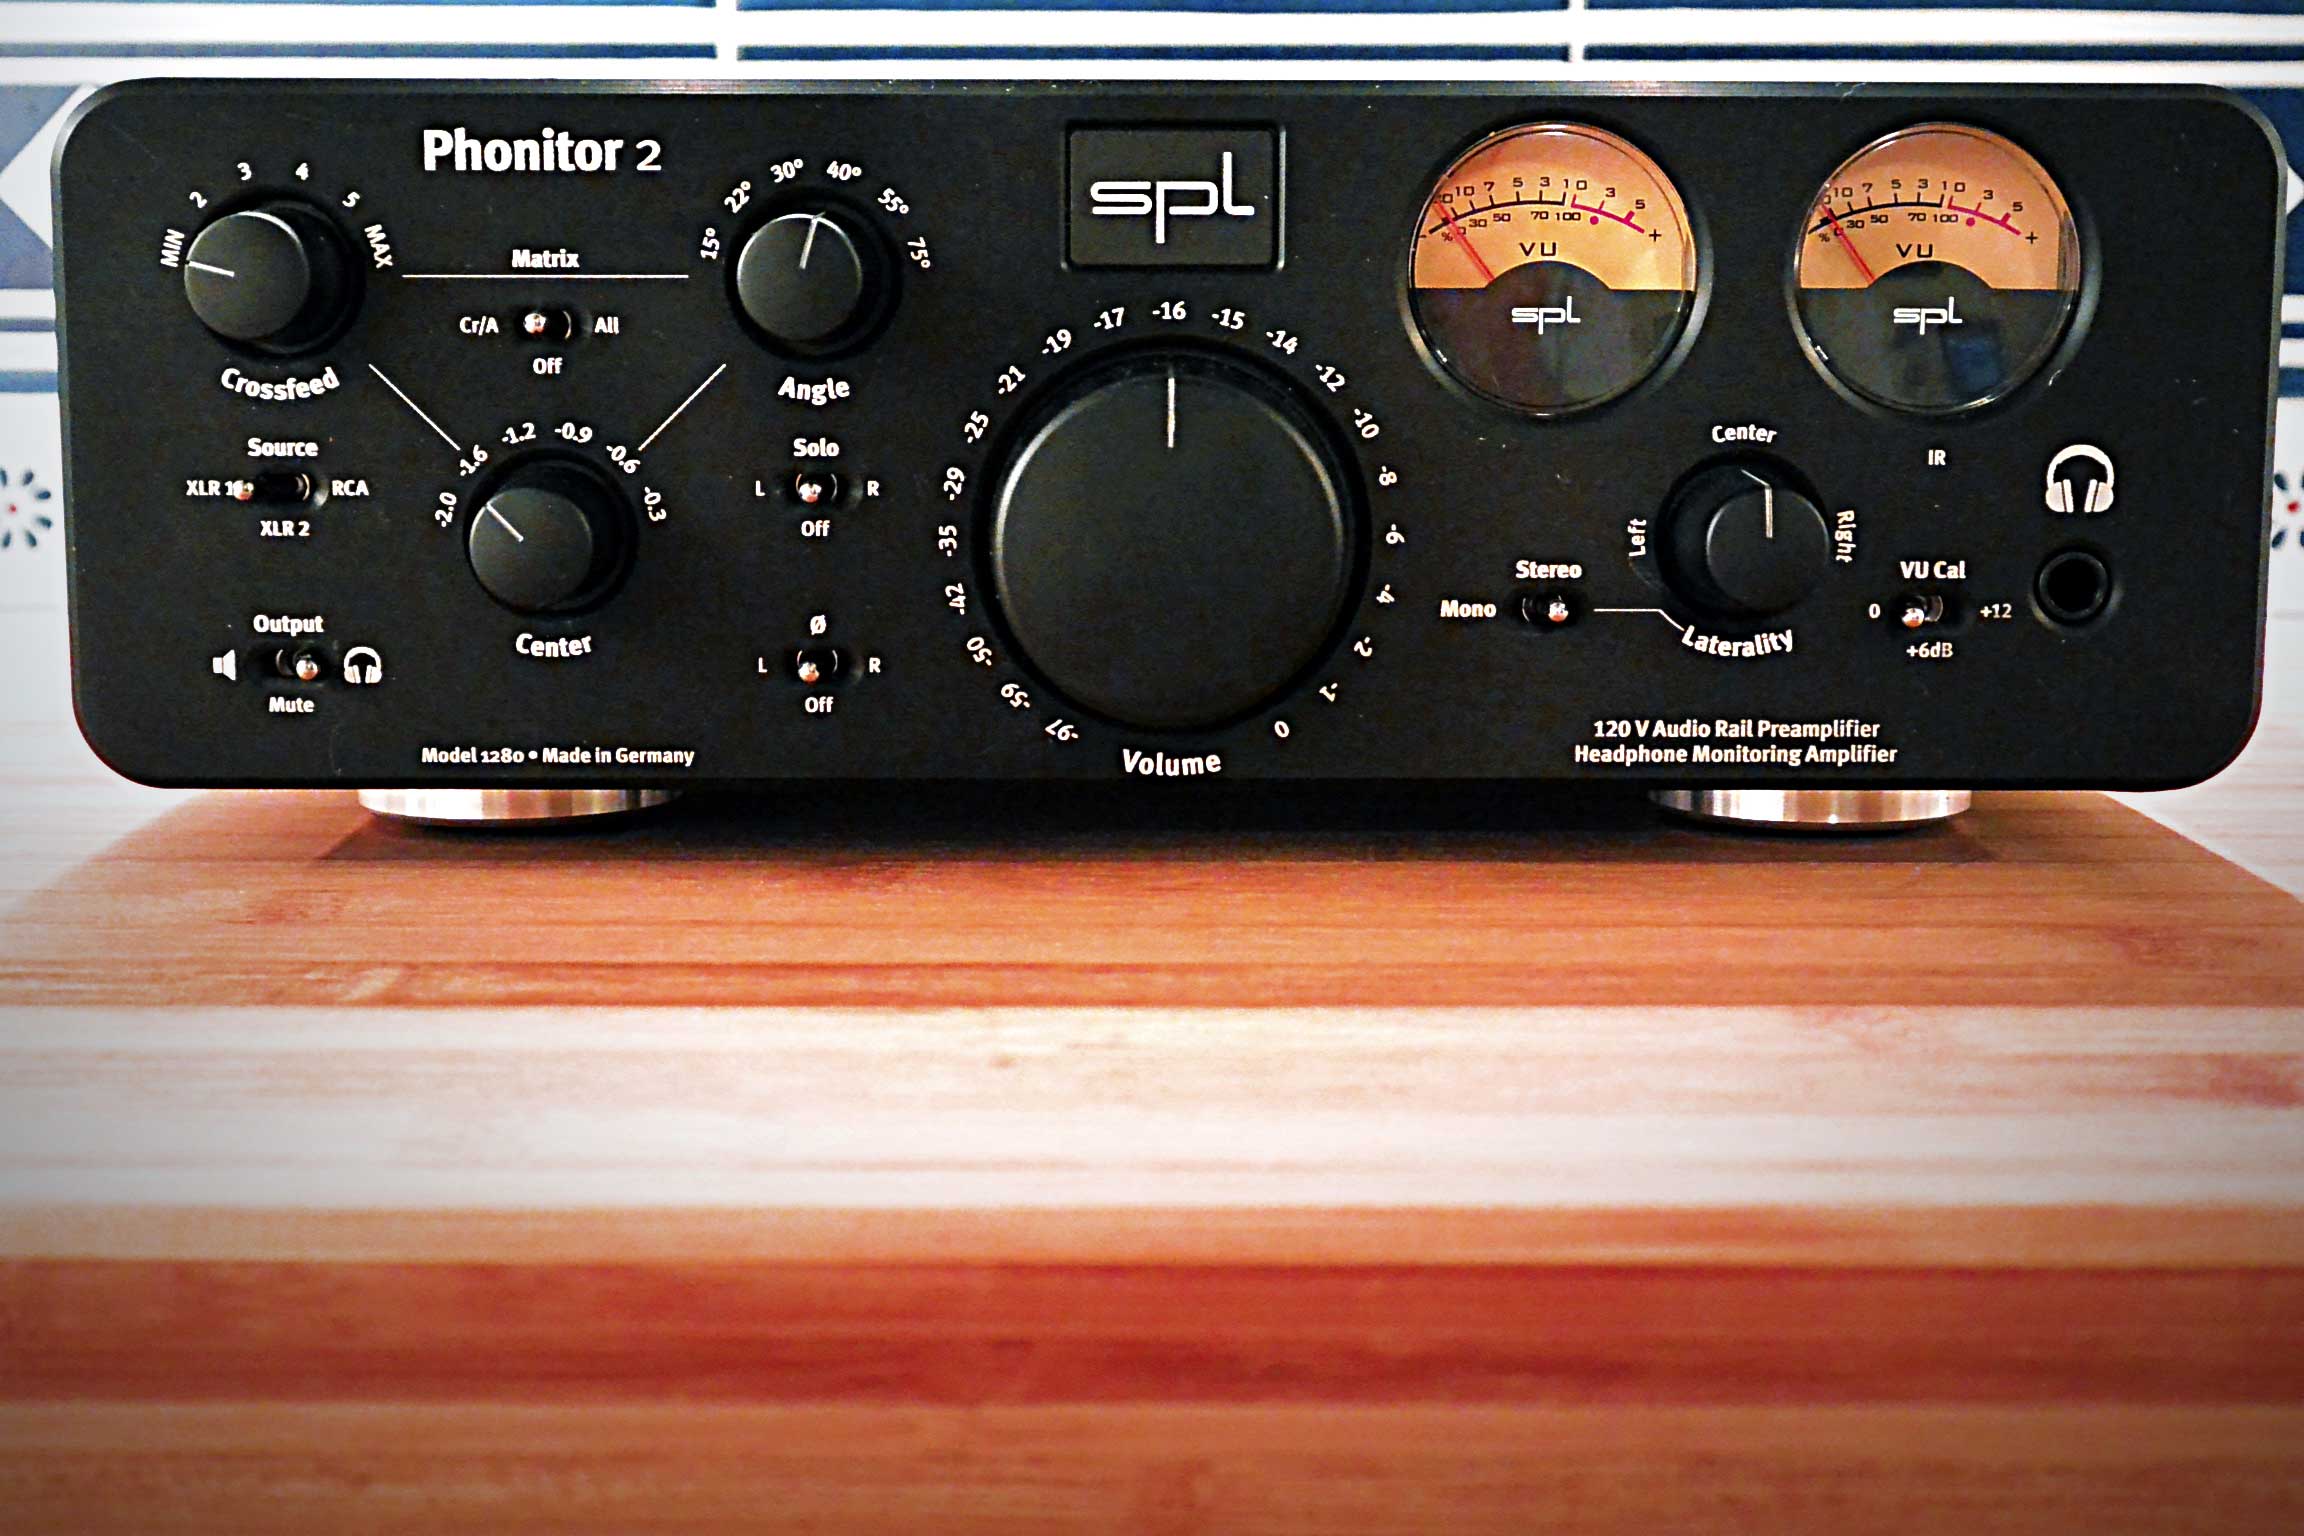 SPL Phonitor 2 front view